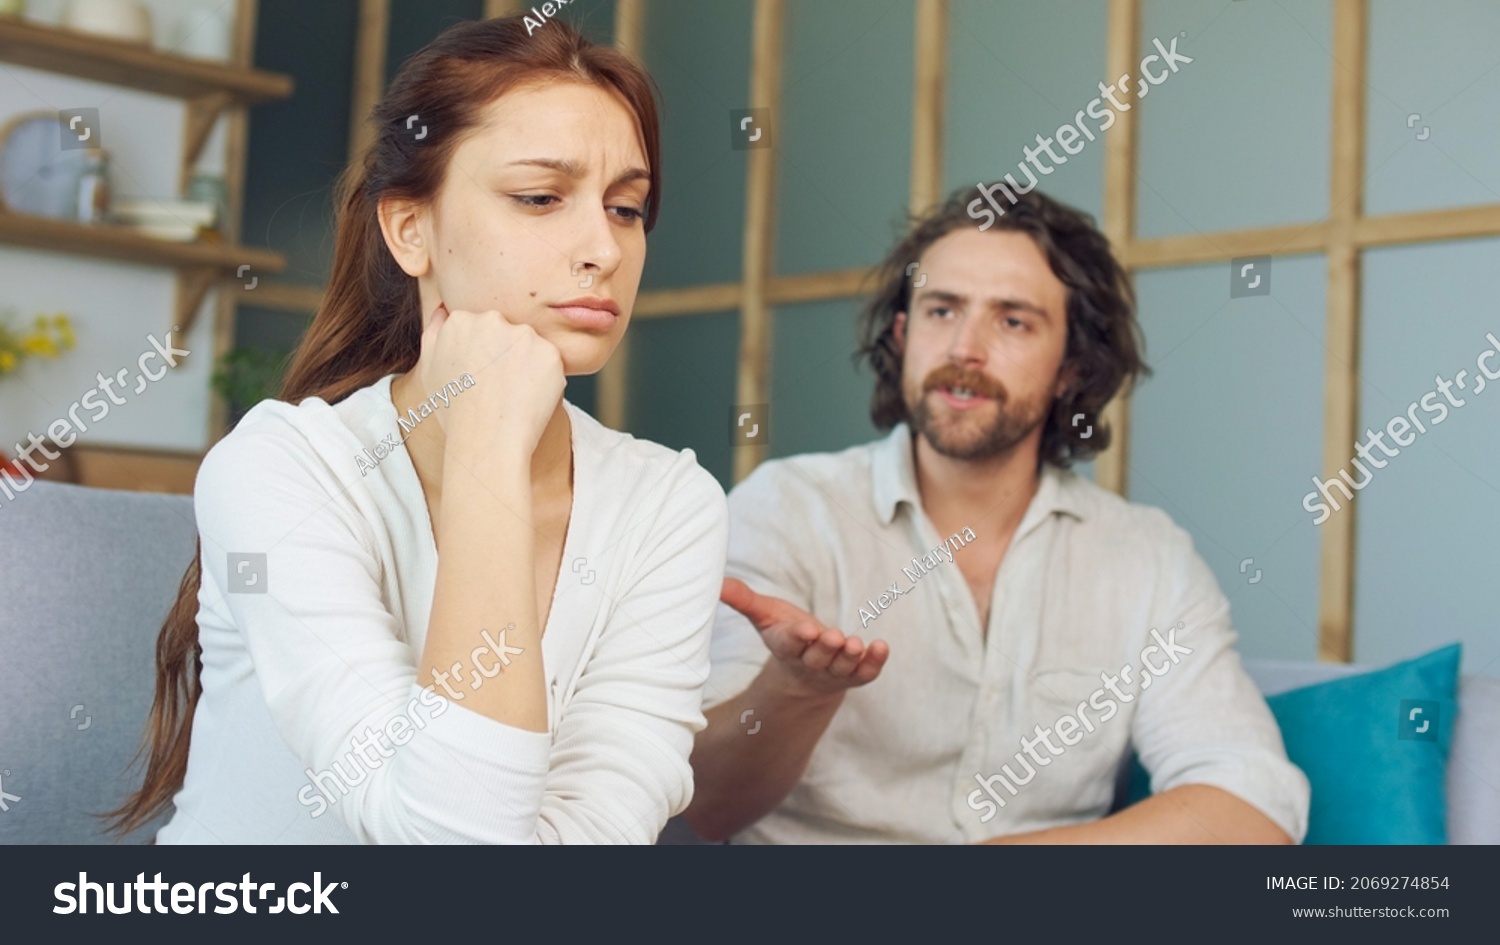 Couple Quarreling Sitting on the Couch at Home, Boyfriend Screams Accusing Girlfriend. Relationship Problems by Reason of Disagreement. The Man and Woman are Arguing. Young Woman Feeling Lonely. #2069274854